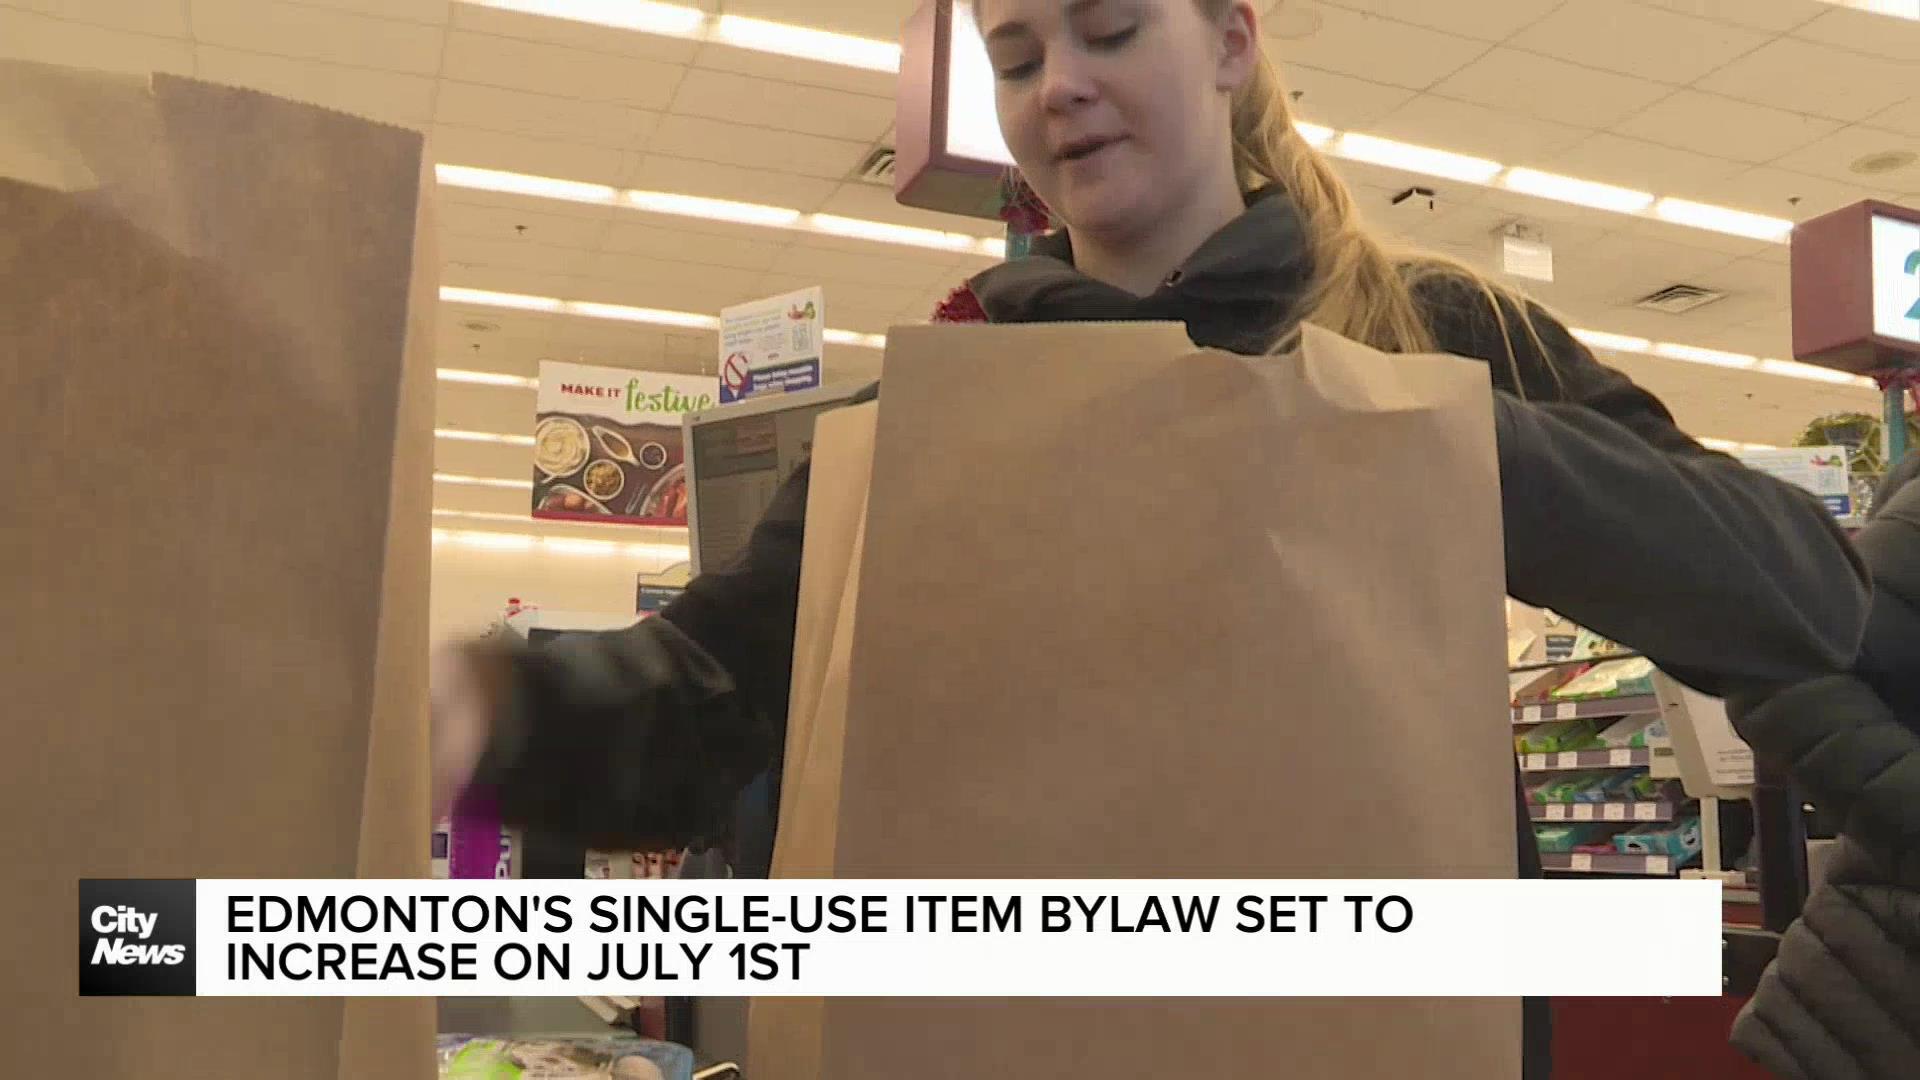 Single-use items bylaw set to increase July 1st